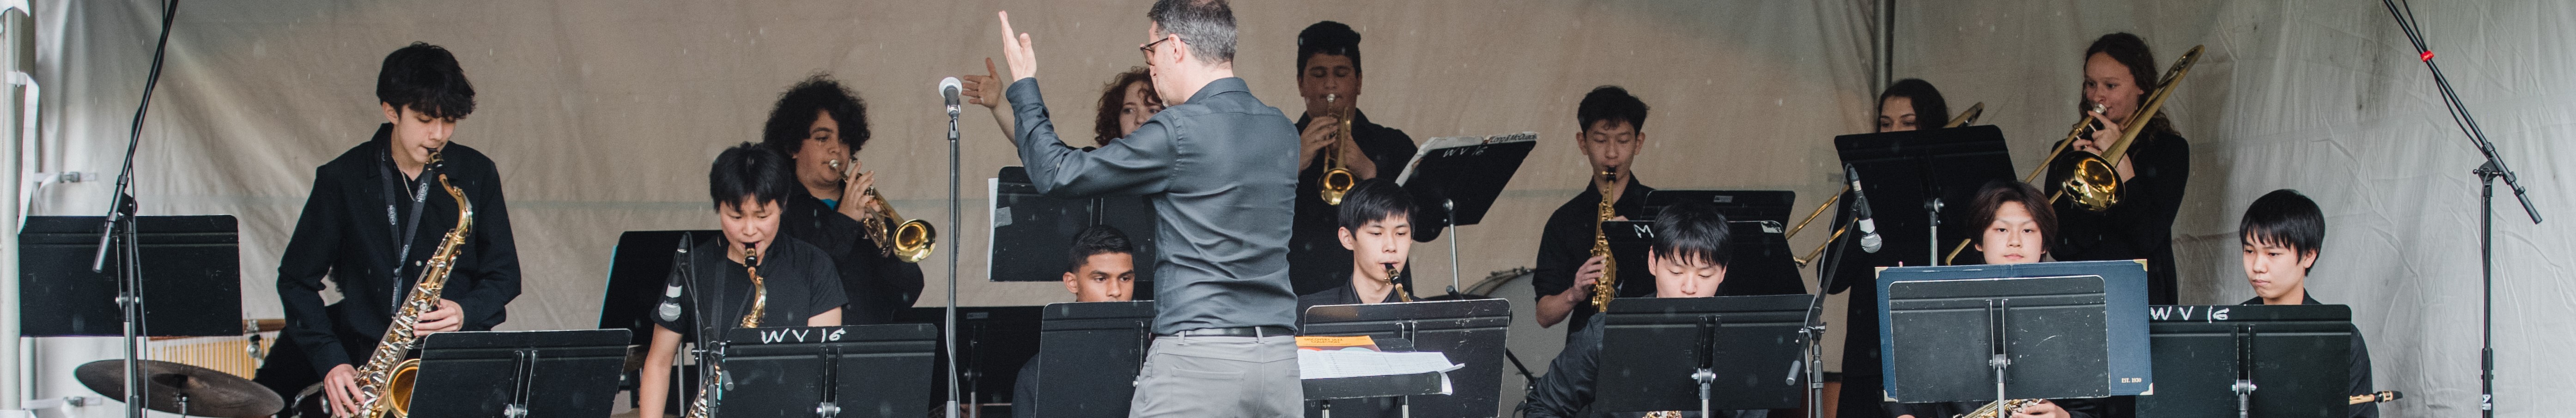 The image shows a group of people playing instruments on the West Vancouver Schools Performance Stage. They are likely a band performing at a concert or musical event.